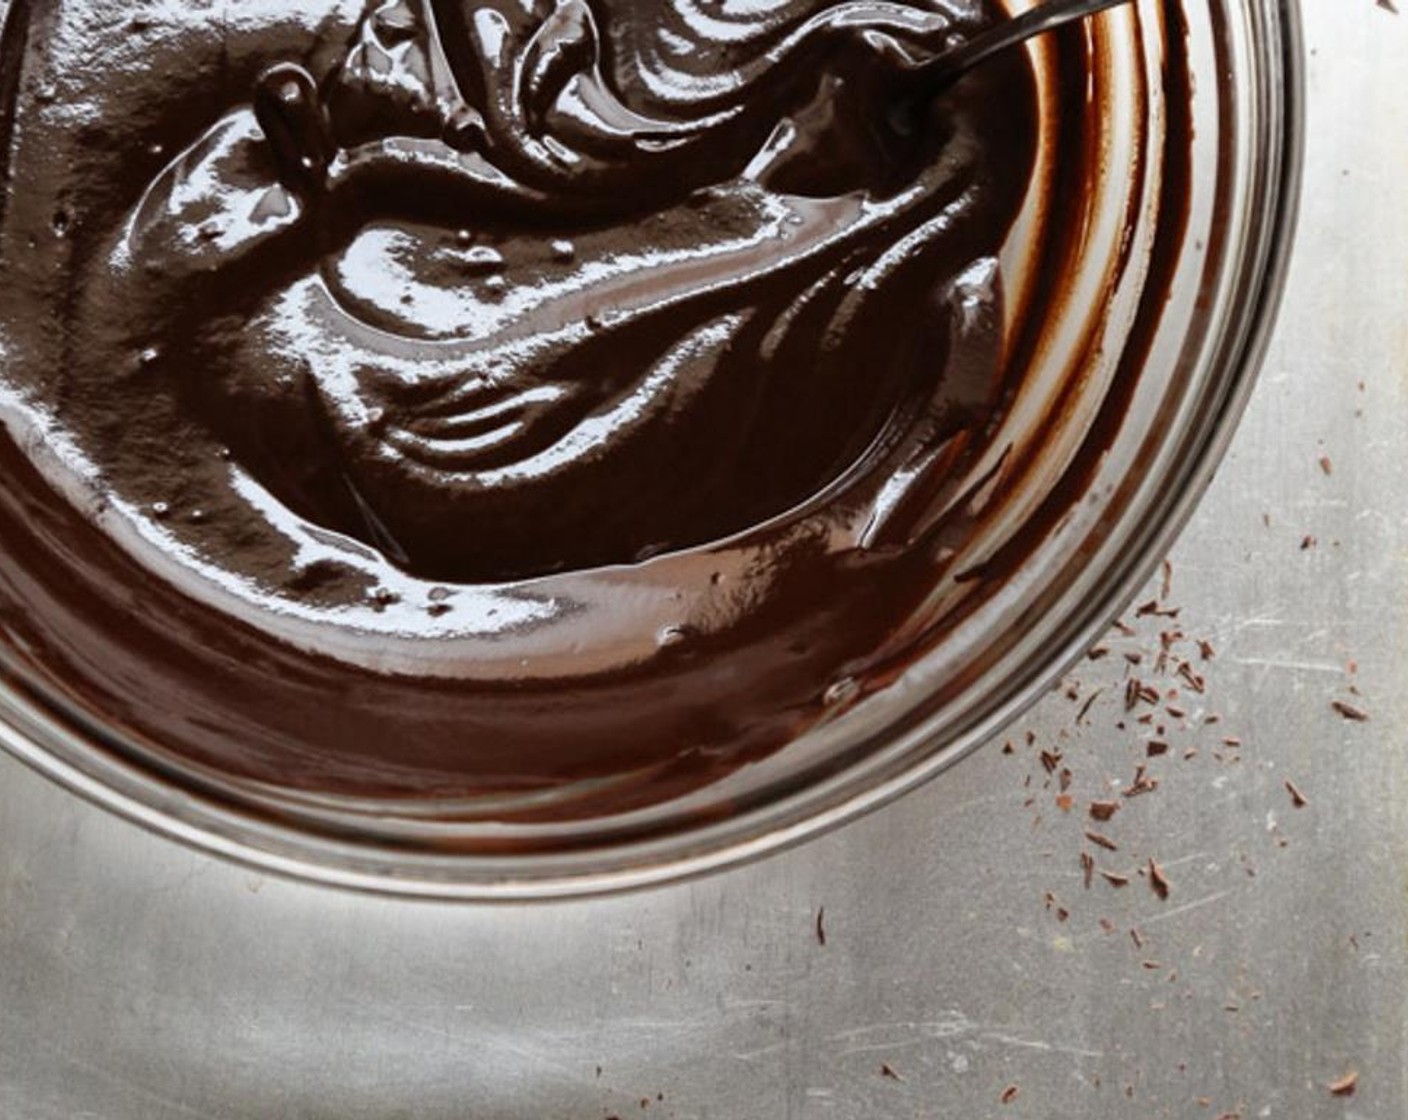 step 2 Stir in the 70% Dark Chocolate (1 2/3 cups) and place a bowl or lid over the top of the bowl to lock in the heat. Let rest for 5 minutes, then mix until smooth.